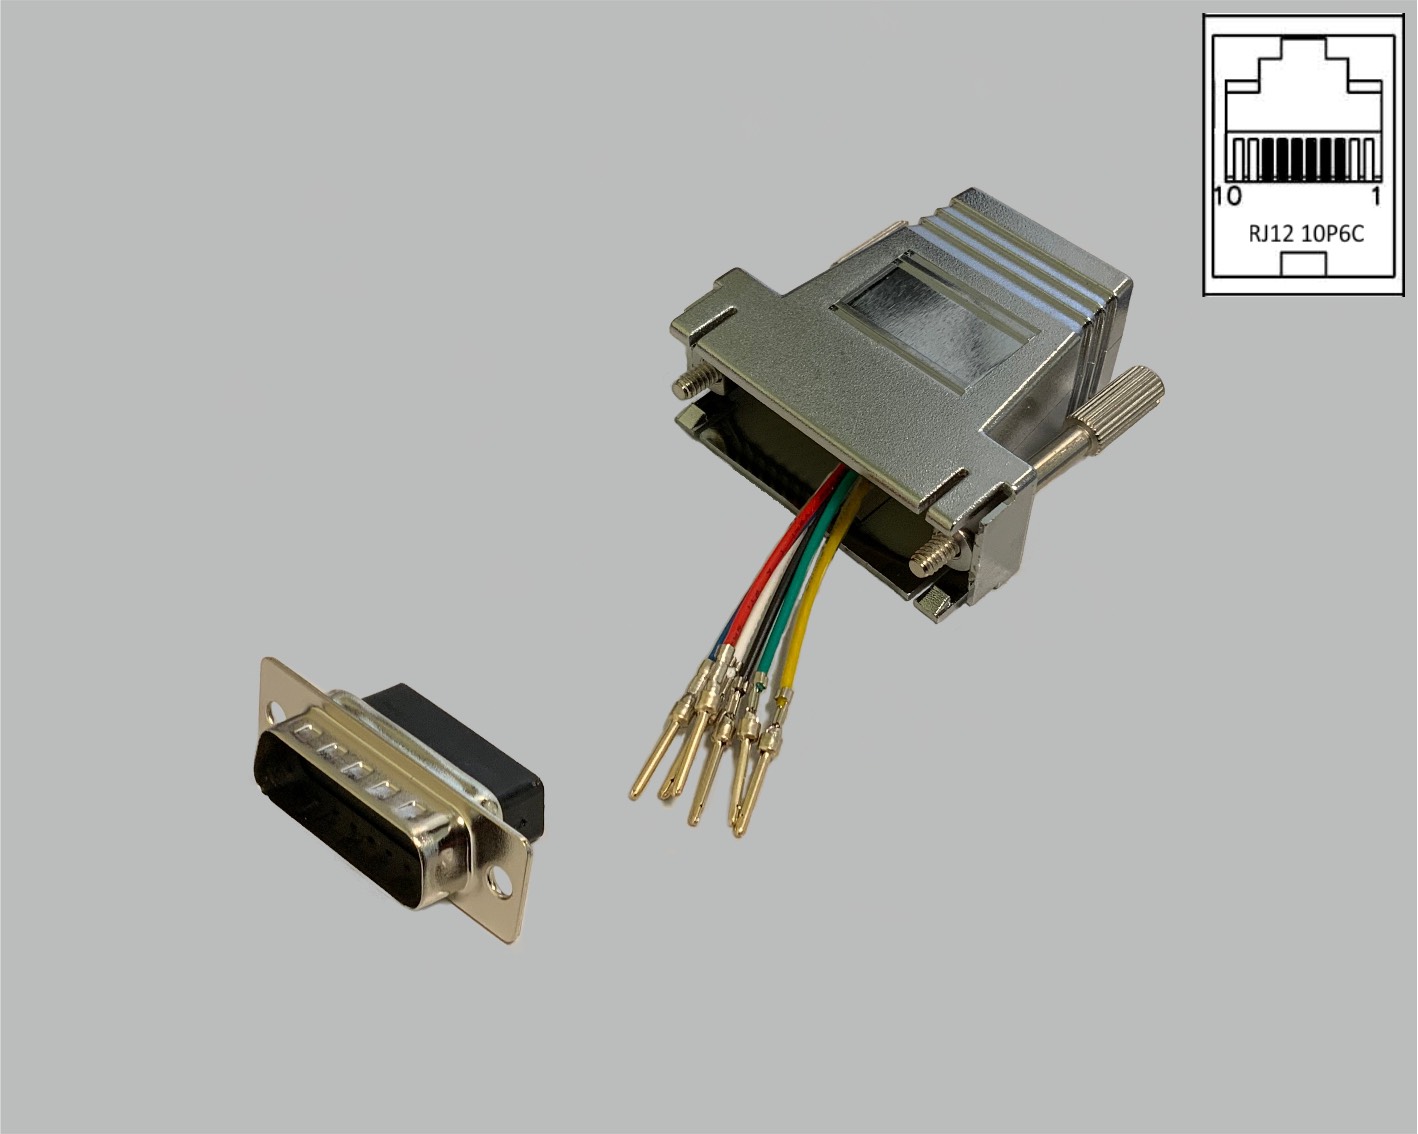 D-Sub/RJ adapter, freely configurable, D-Sub male connector 15-pin to RJ12 (10P6C) female connector, metallised